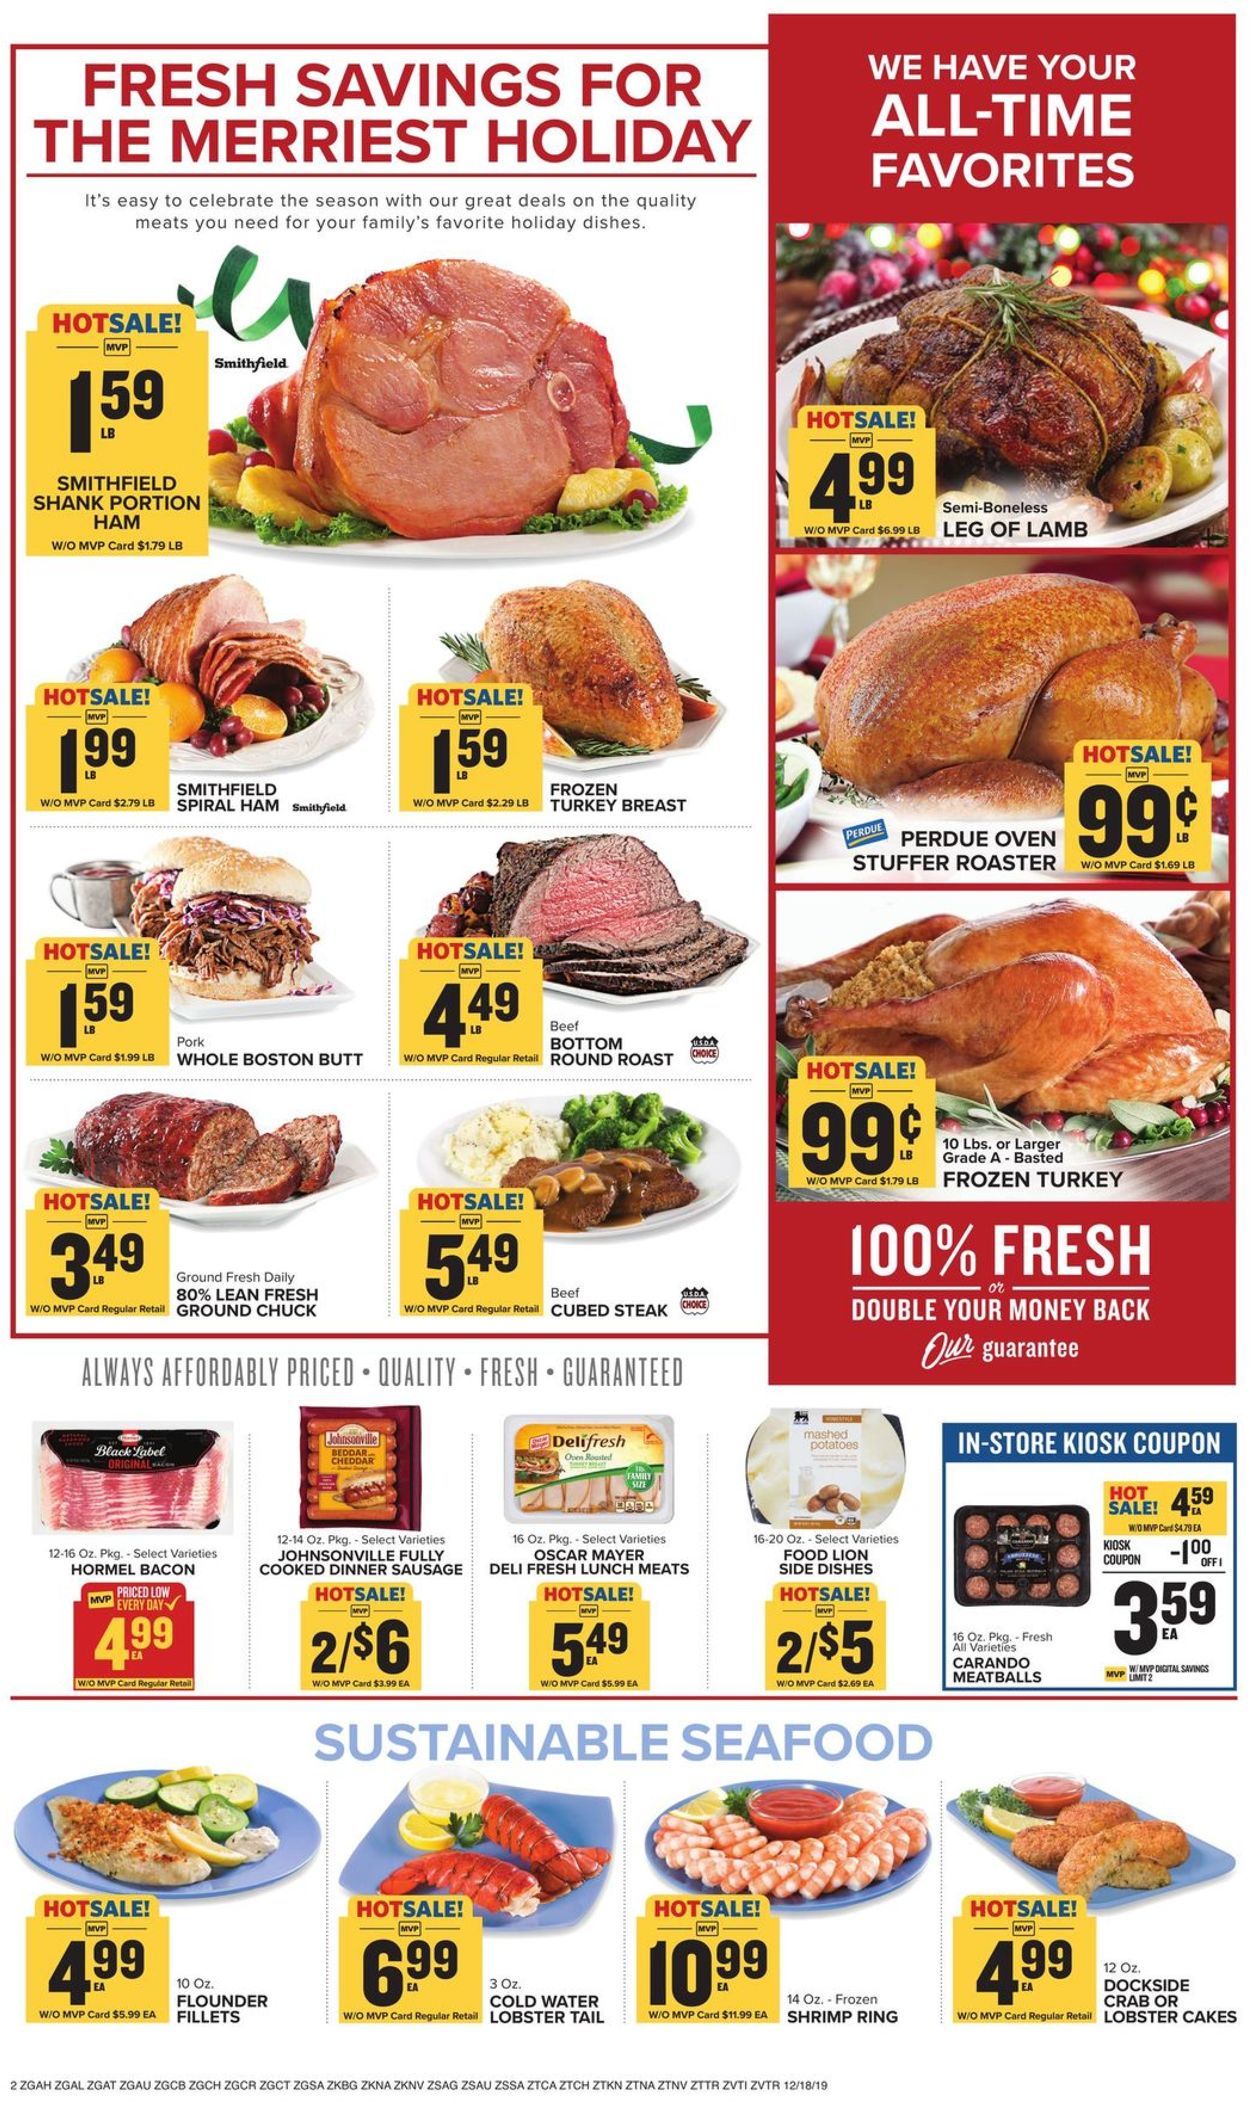 Catalogue Food Lion - Holidays Ad 2019 from 12/18/2019